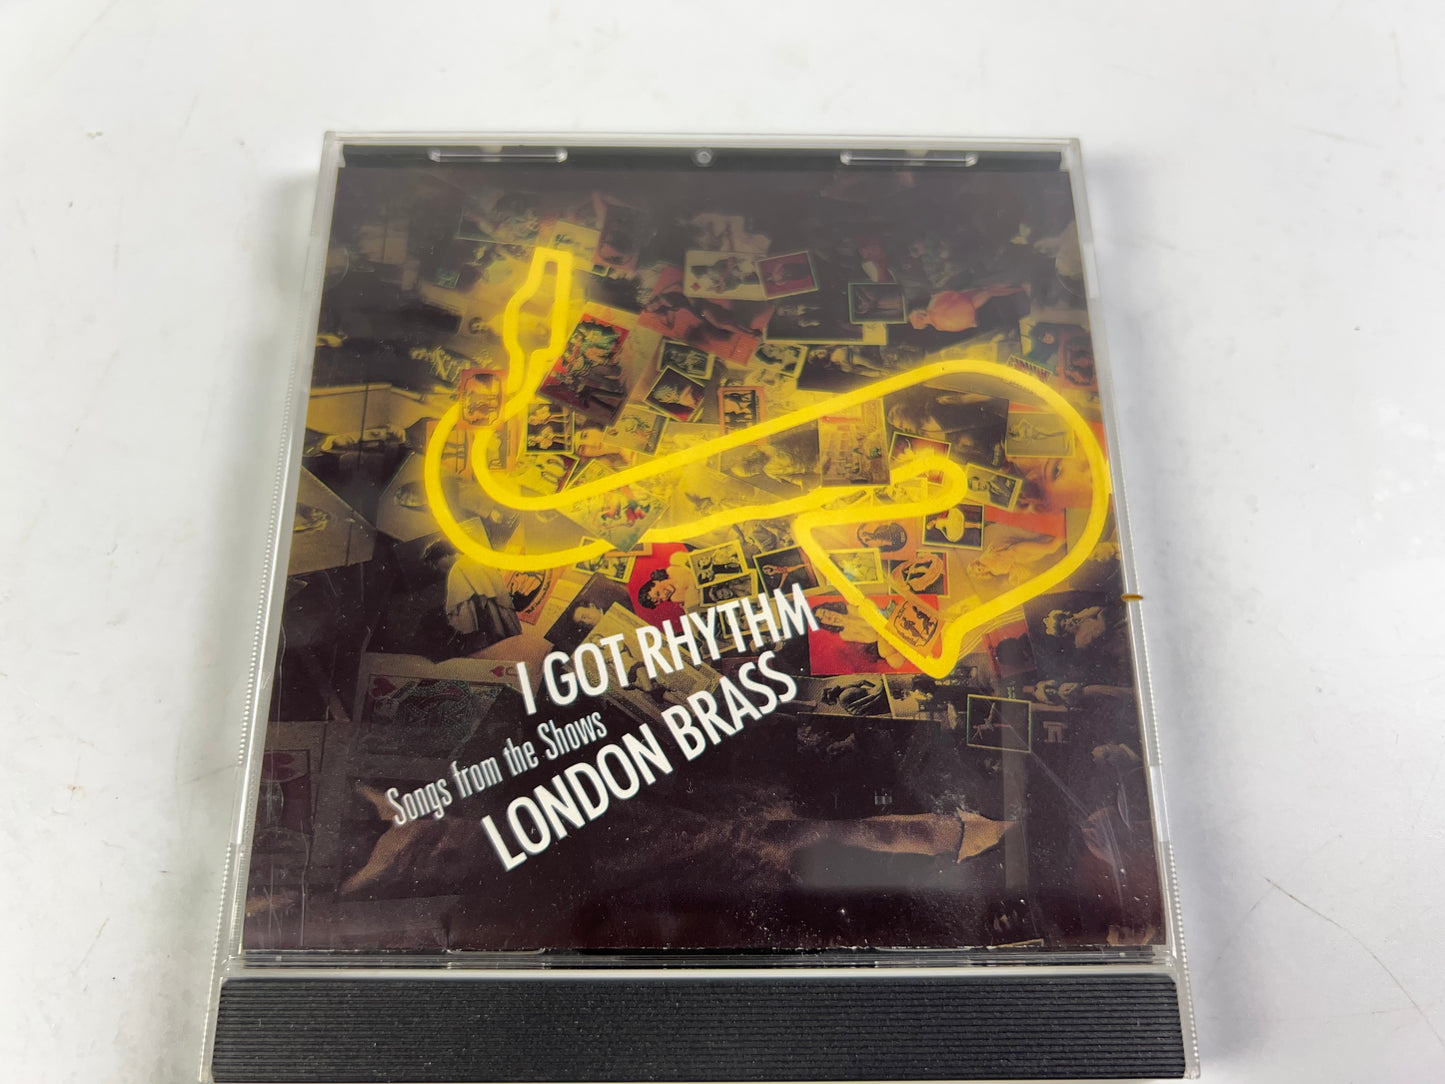 London Brass - I Got Rhythm Songs From The Shows (CD)